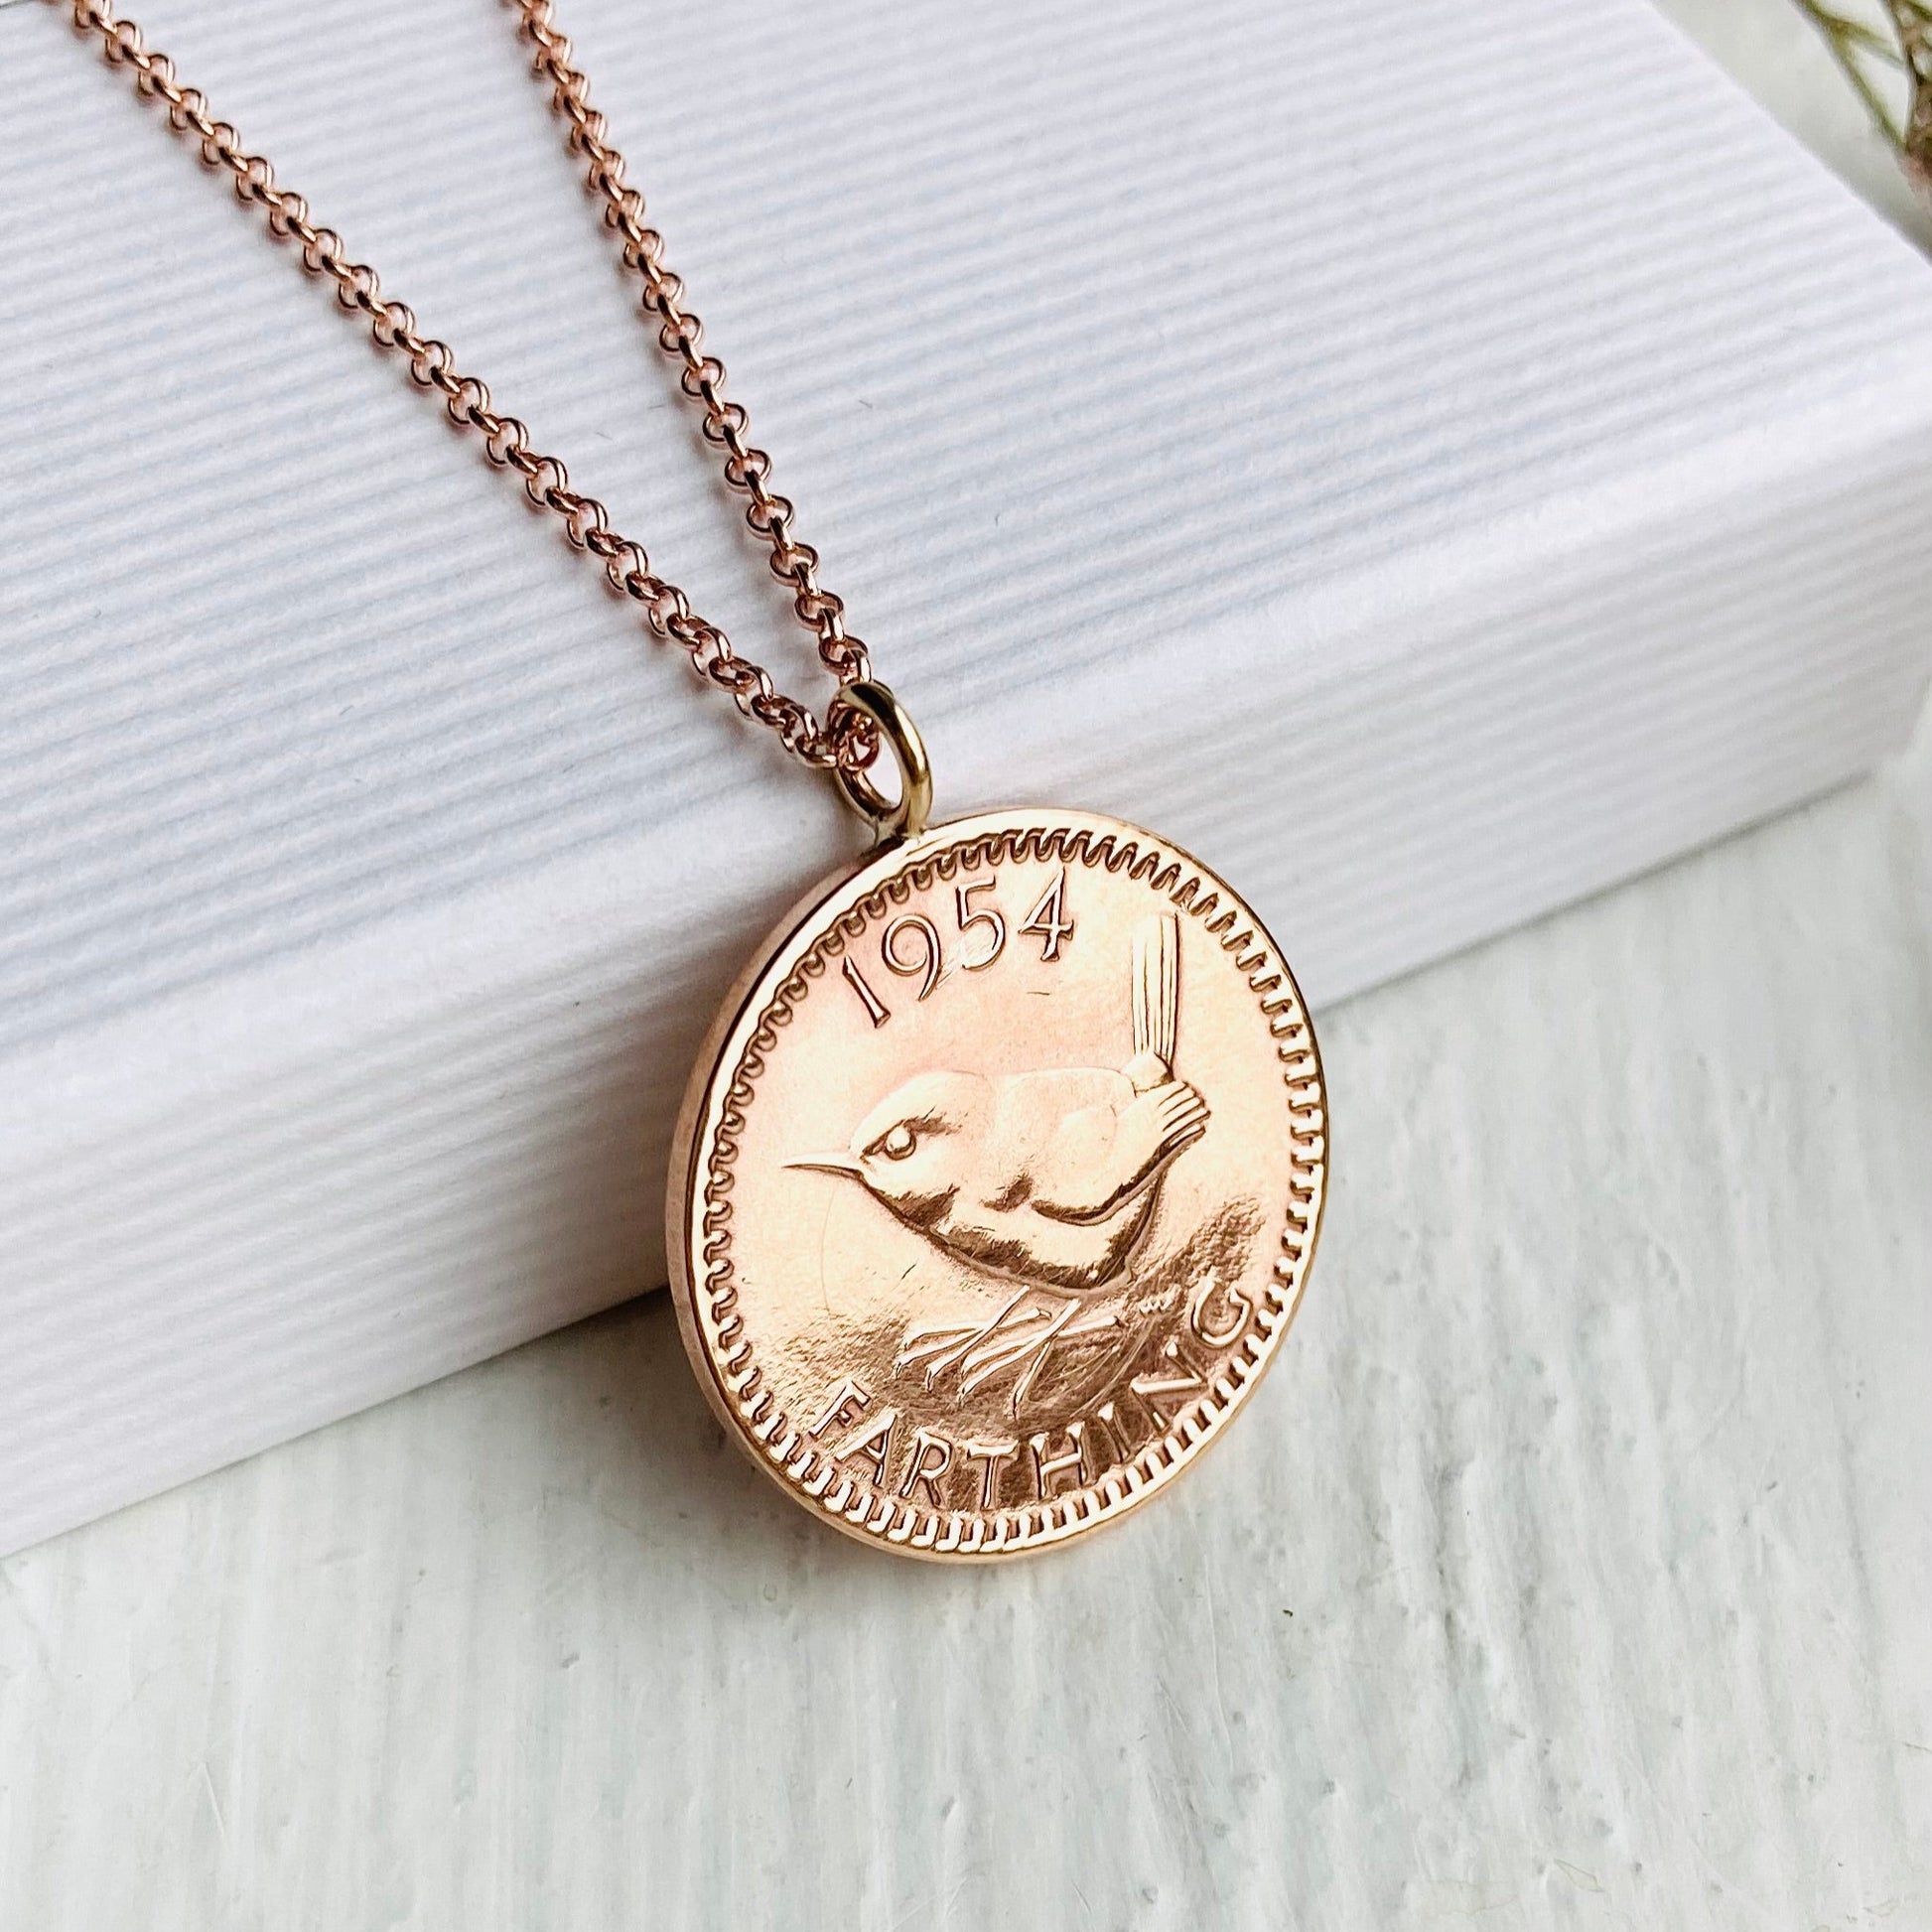 Bronze coin pendant with British farthing and wren coin on a rose gold chain